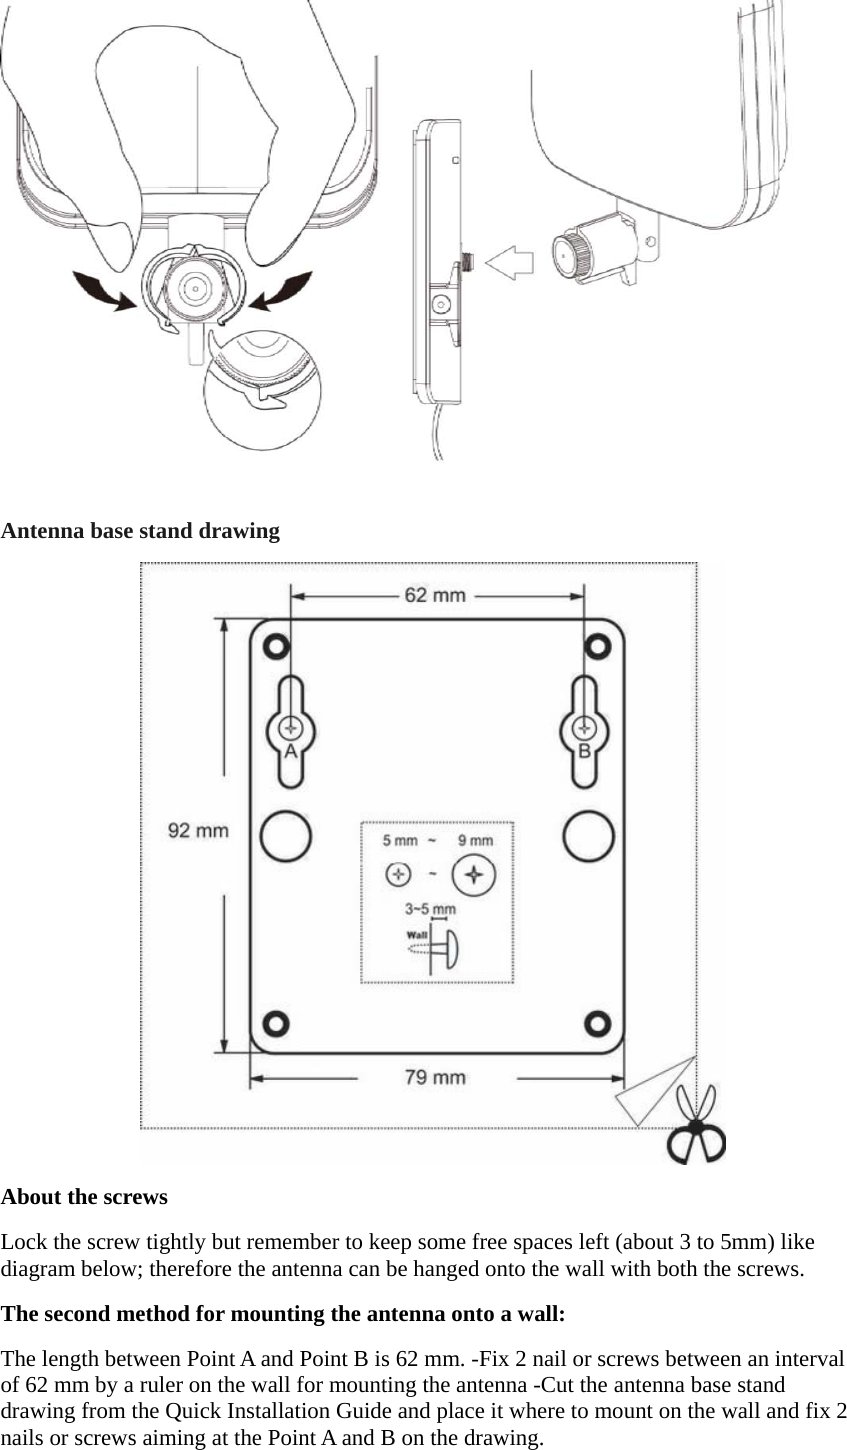  Antenna base stand drawing  About the screws Lock the screw tightly but remember to keep some free spaces left (about 3 to 5mm) like diagram below; therefore the antenna can be hanged onto the wall with both the screws. The second method for mounting the antenna onto a wall: The length between Point A and Point B is 62 mm. -Fix 2 nail or screws between an interval of 62 mm by a ruler on the wall for mounting the antenna -Cut the antenna base stand drawing from the Quick Installation Guide and place it where to mount on the wall and fix 2 nails or screws aiming at the Point A and B on the drawing. 